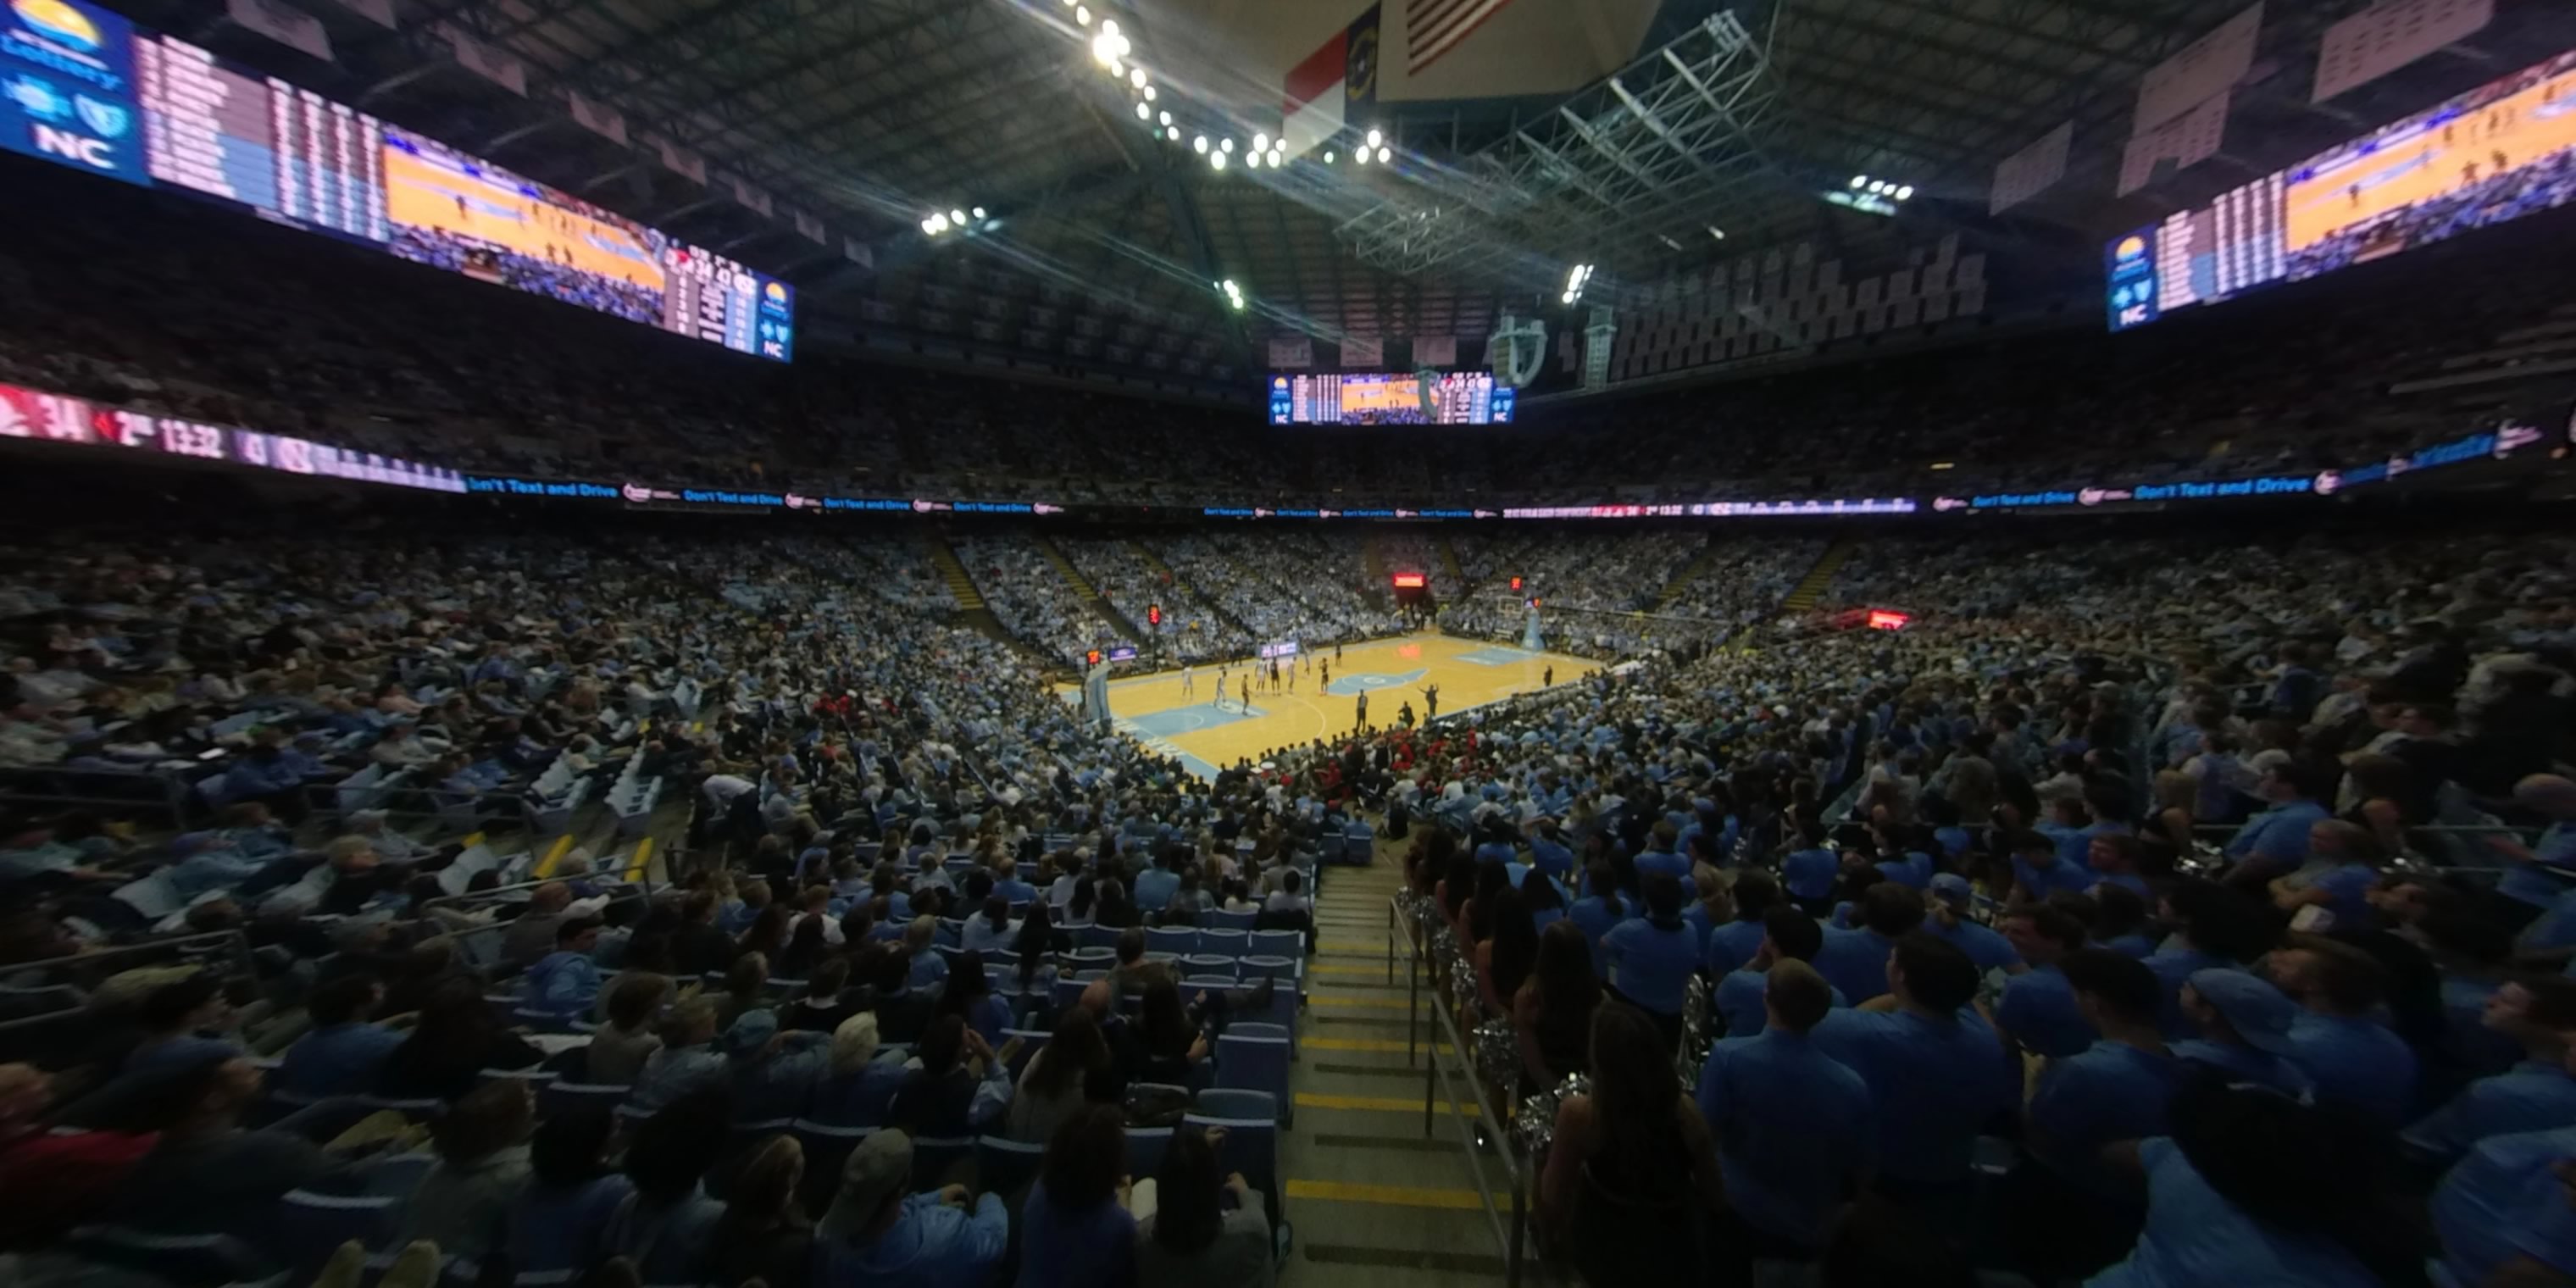 section 104 panoramic seat view  - dean smith center